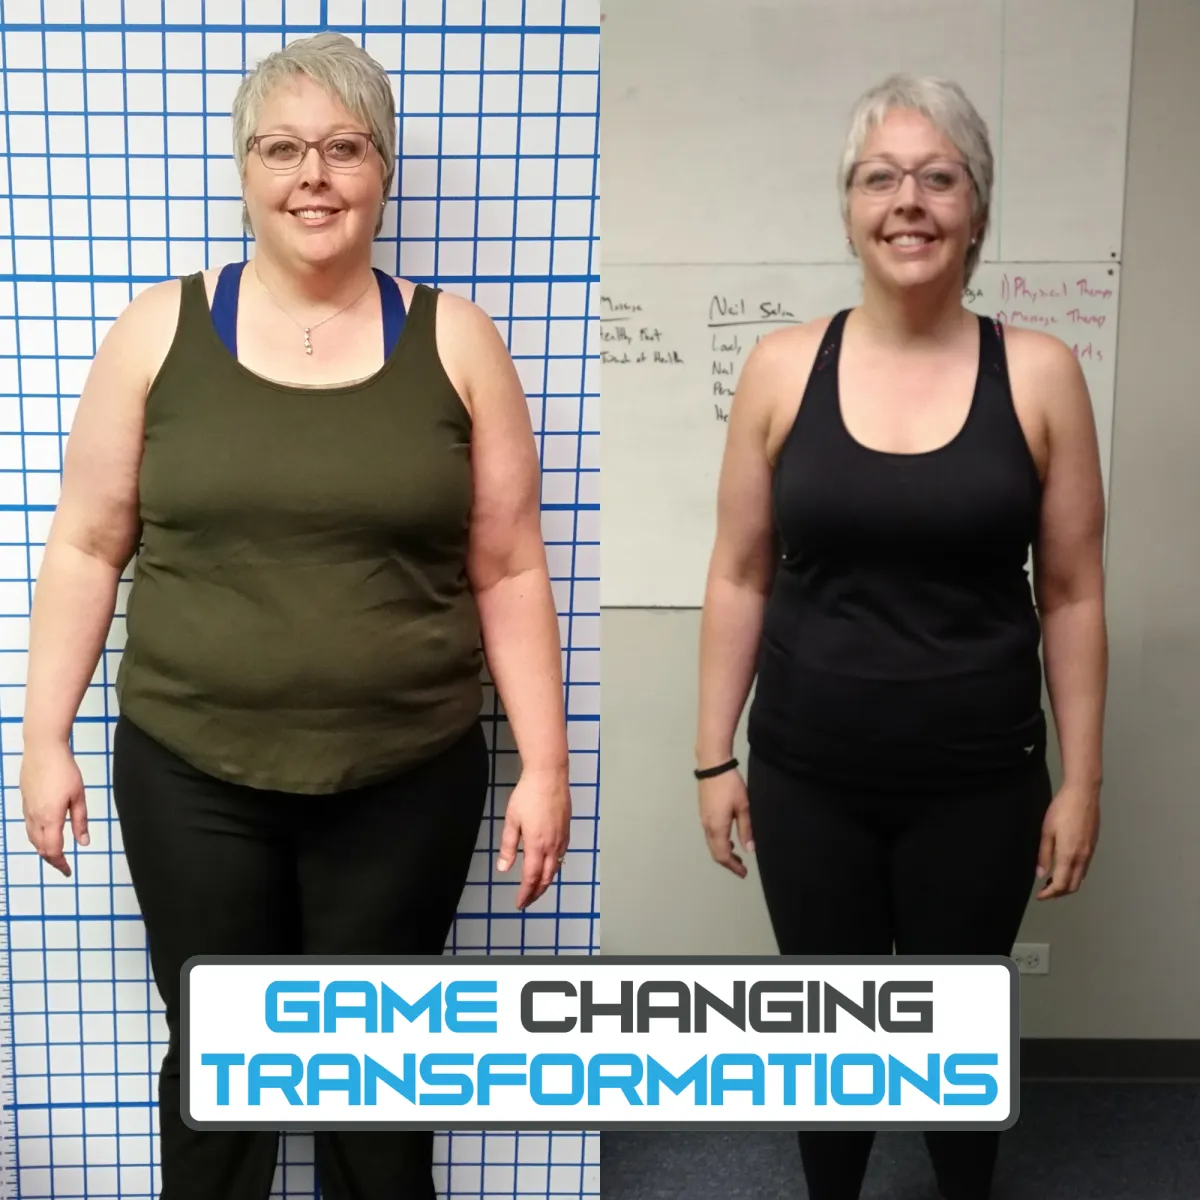 Another amazing weight loss transformation in Mundelein IL